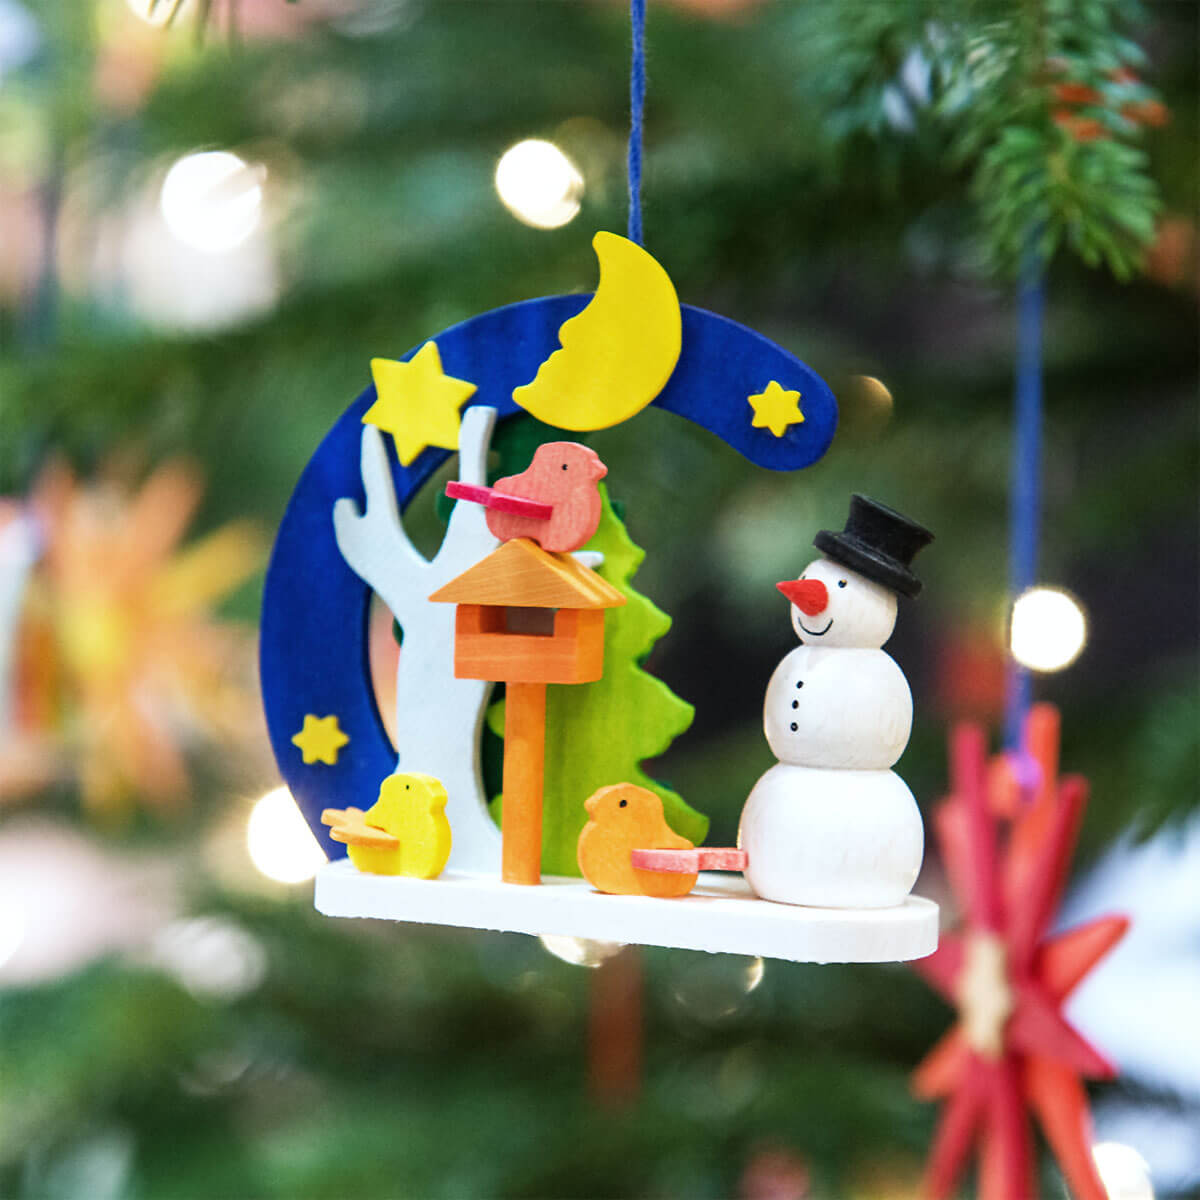 Arch 'Snowman' Ornament with deer